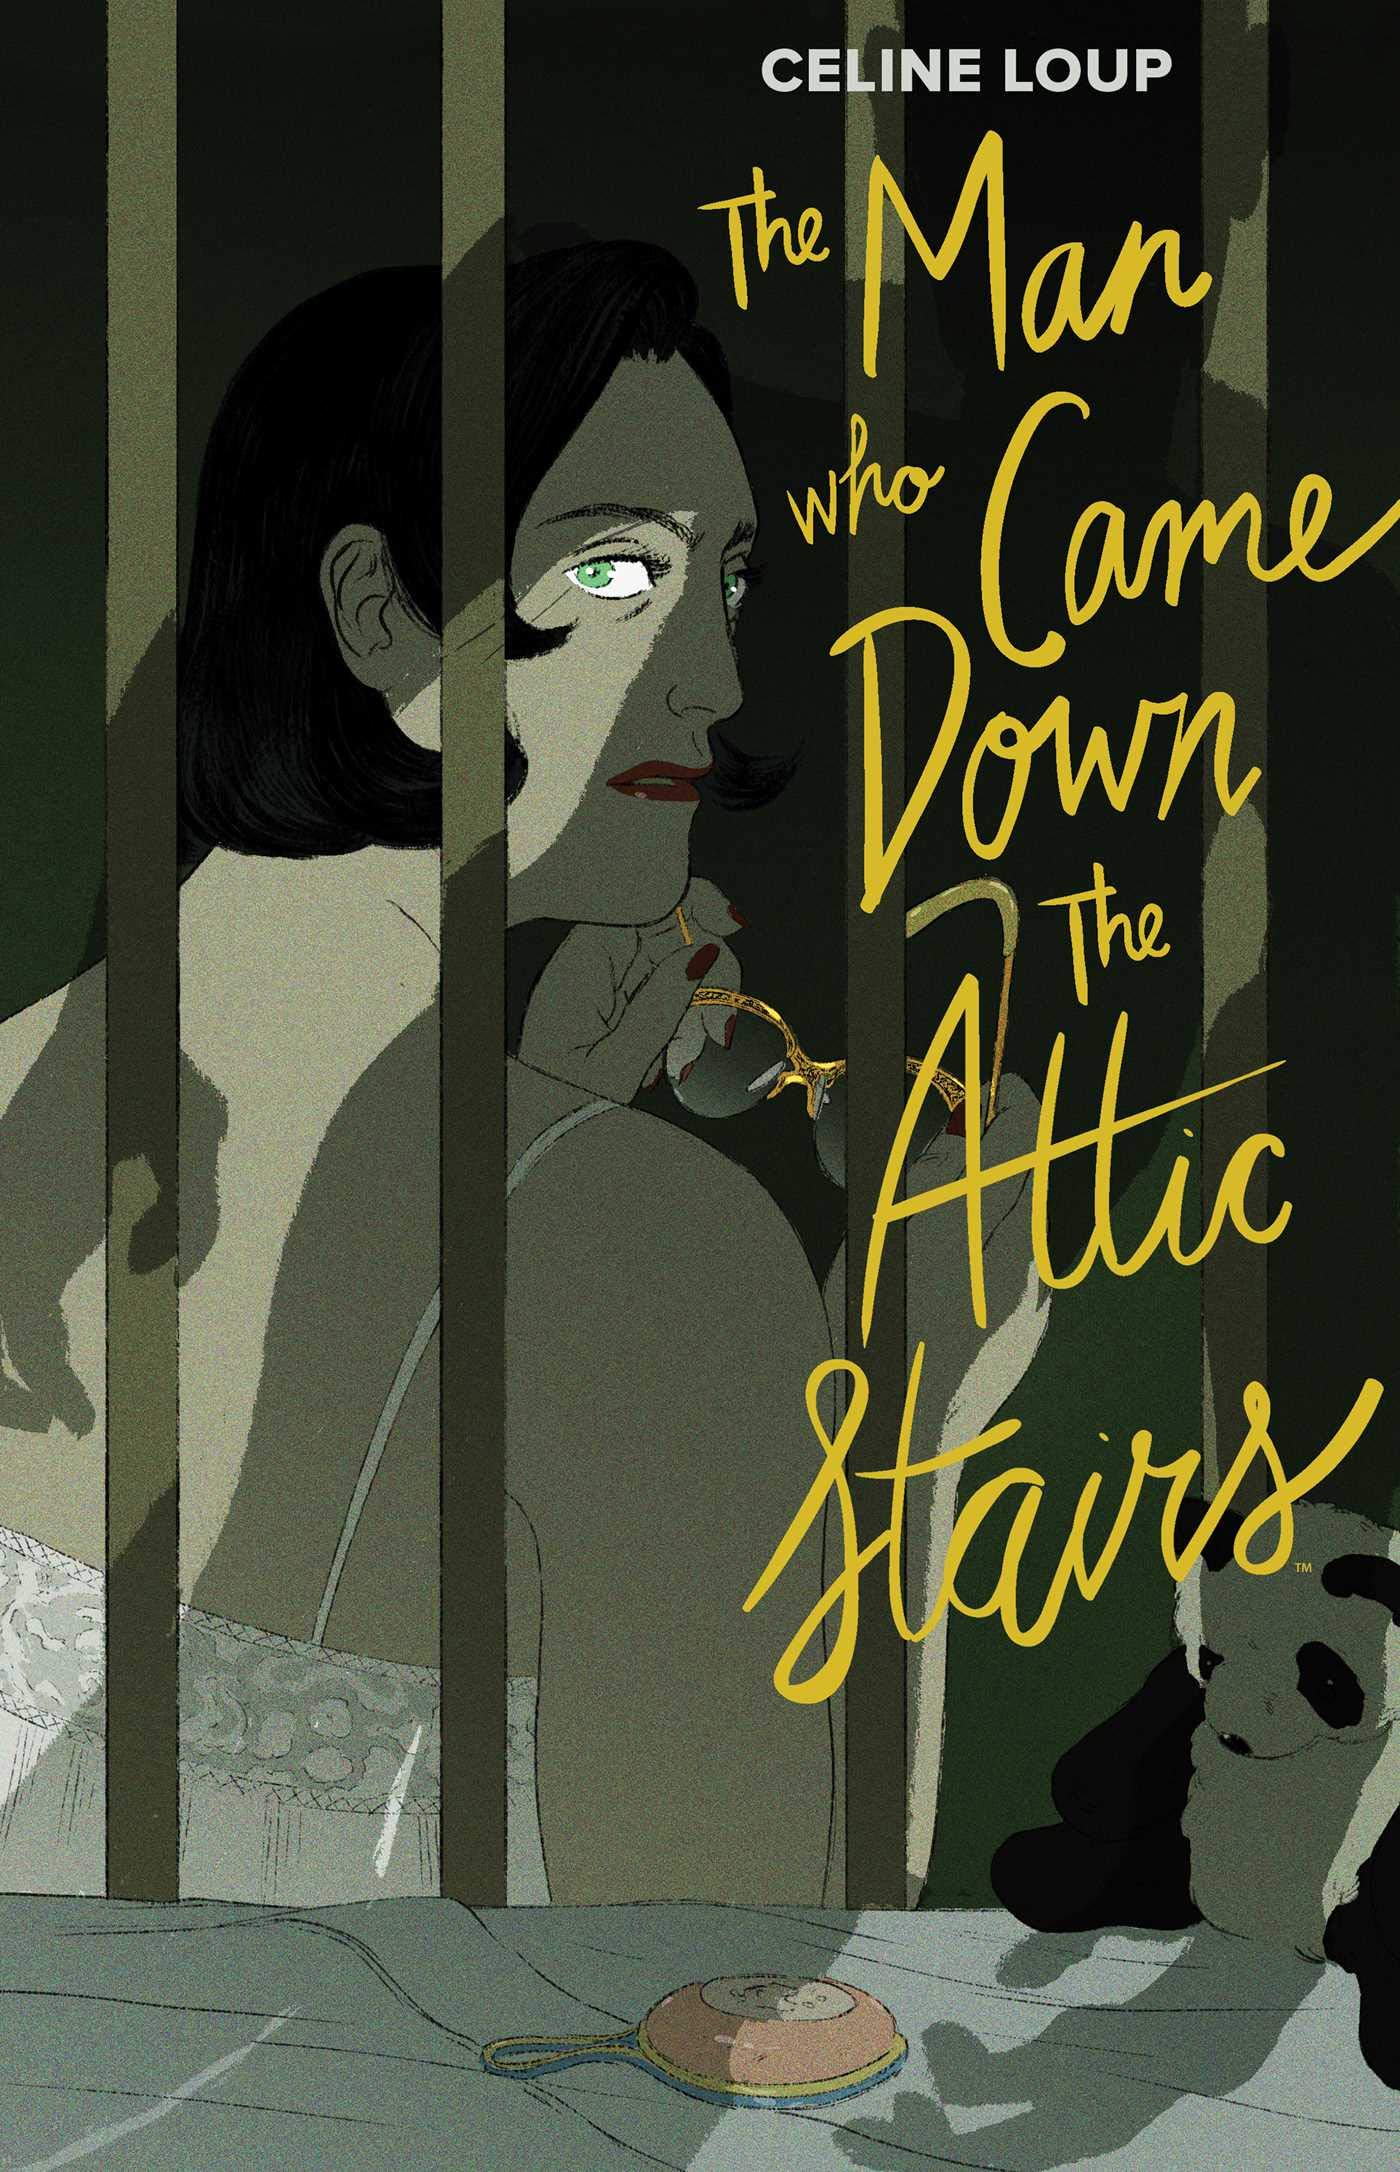 Best Comics of 2019: The Man Who Came Down the Attic Stairs